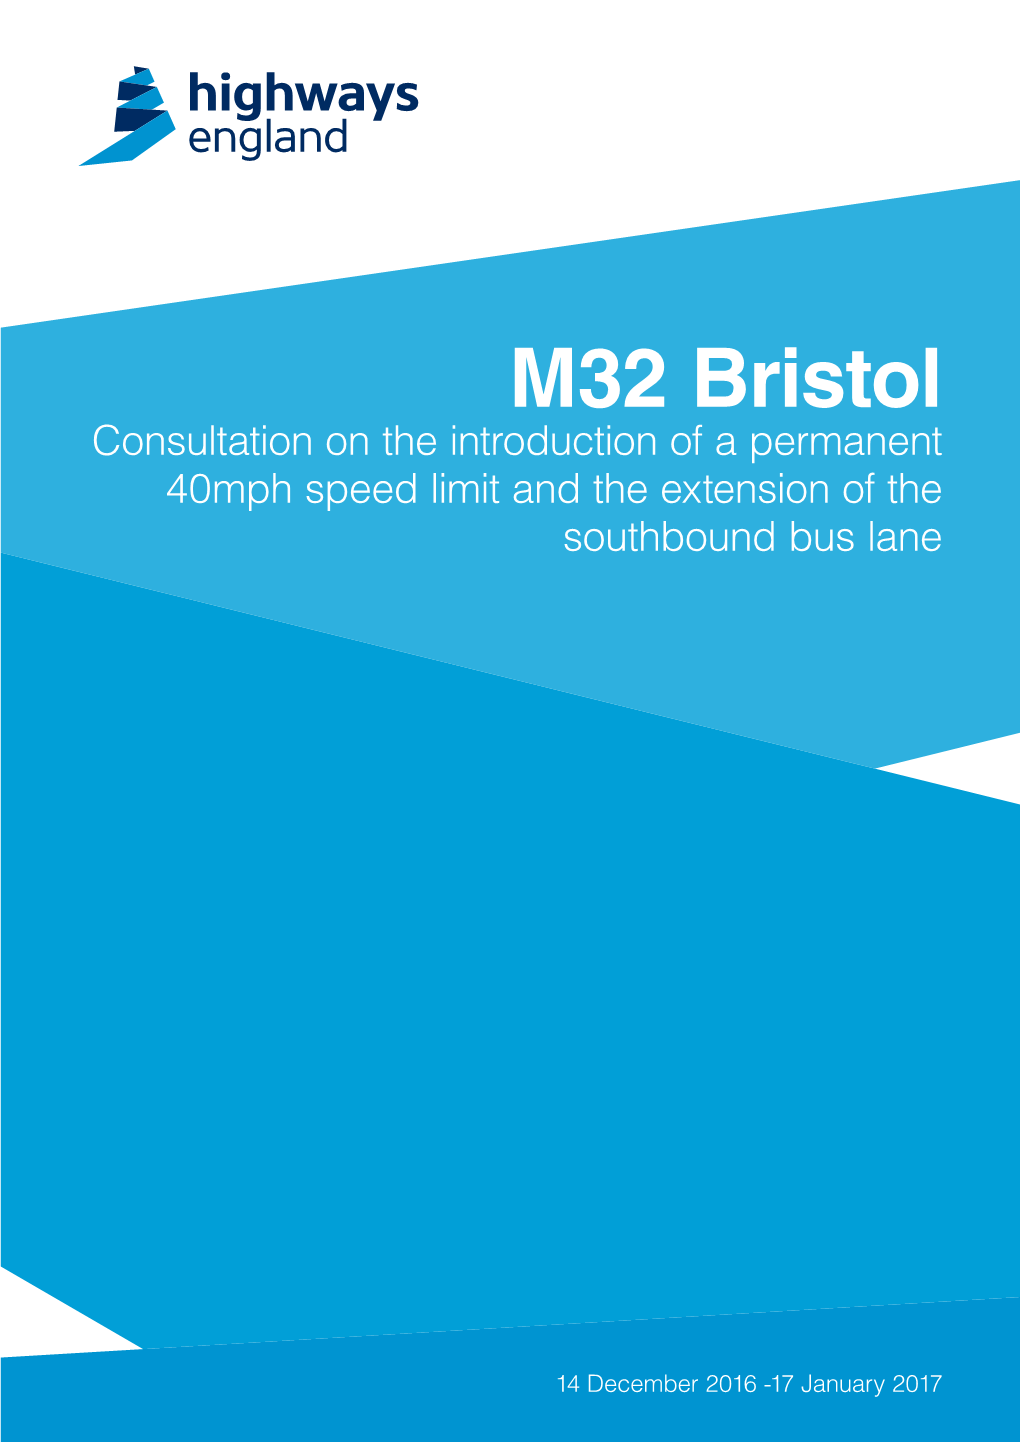 M32 Bristol Consultation on the Introduction of a Permanent 40Mph Speed Limit and the Extension of the Southbound Bus Lane